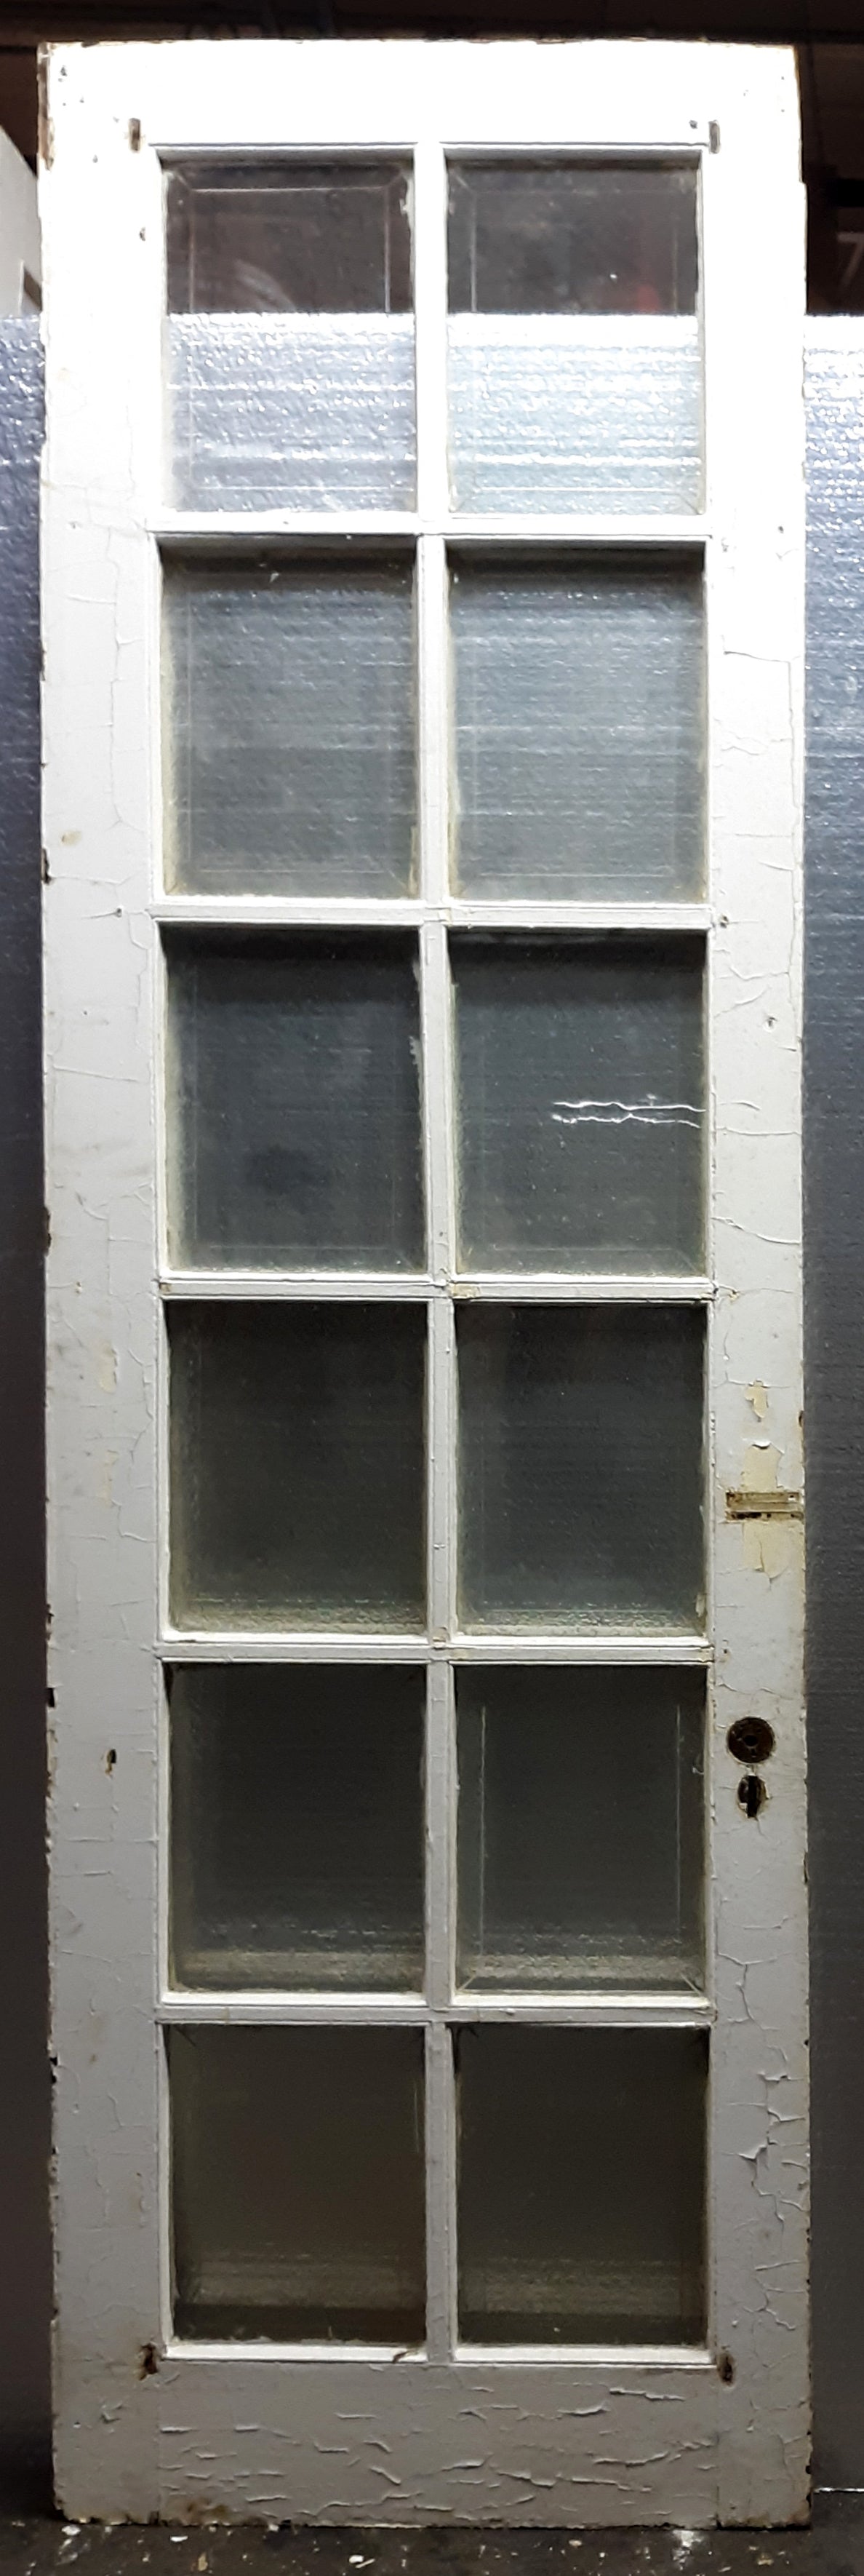 32"x106.5"x2" Antique Vintage Old Reclaimed Salvaged Wooden Wood Interior Exterior French Door Windows Wavy Beveled Glass